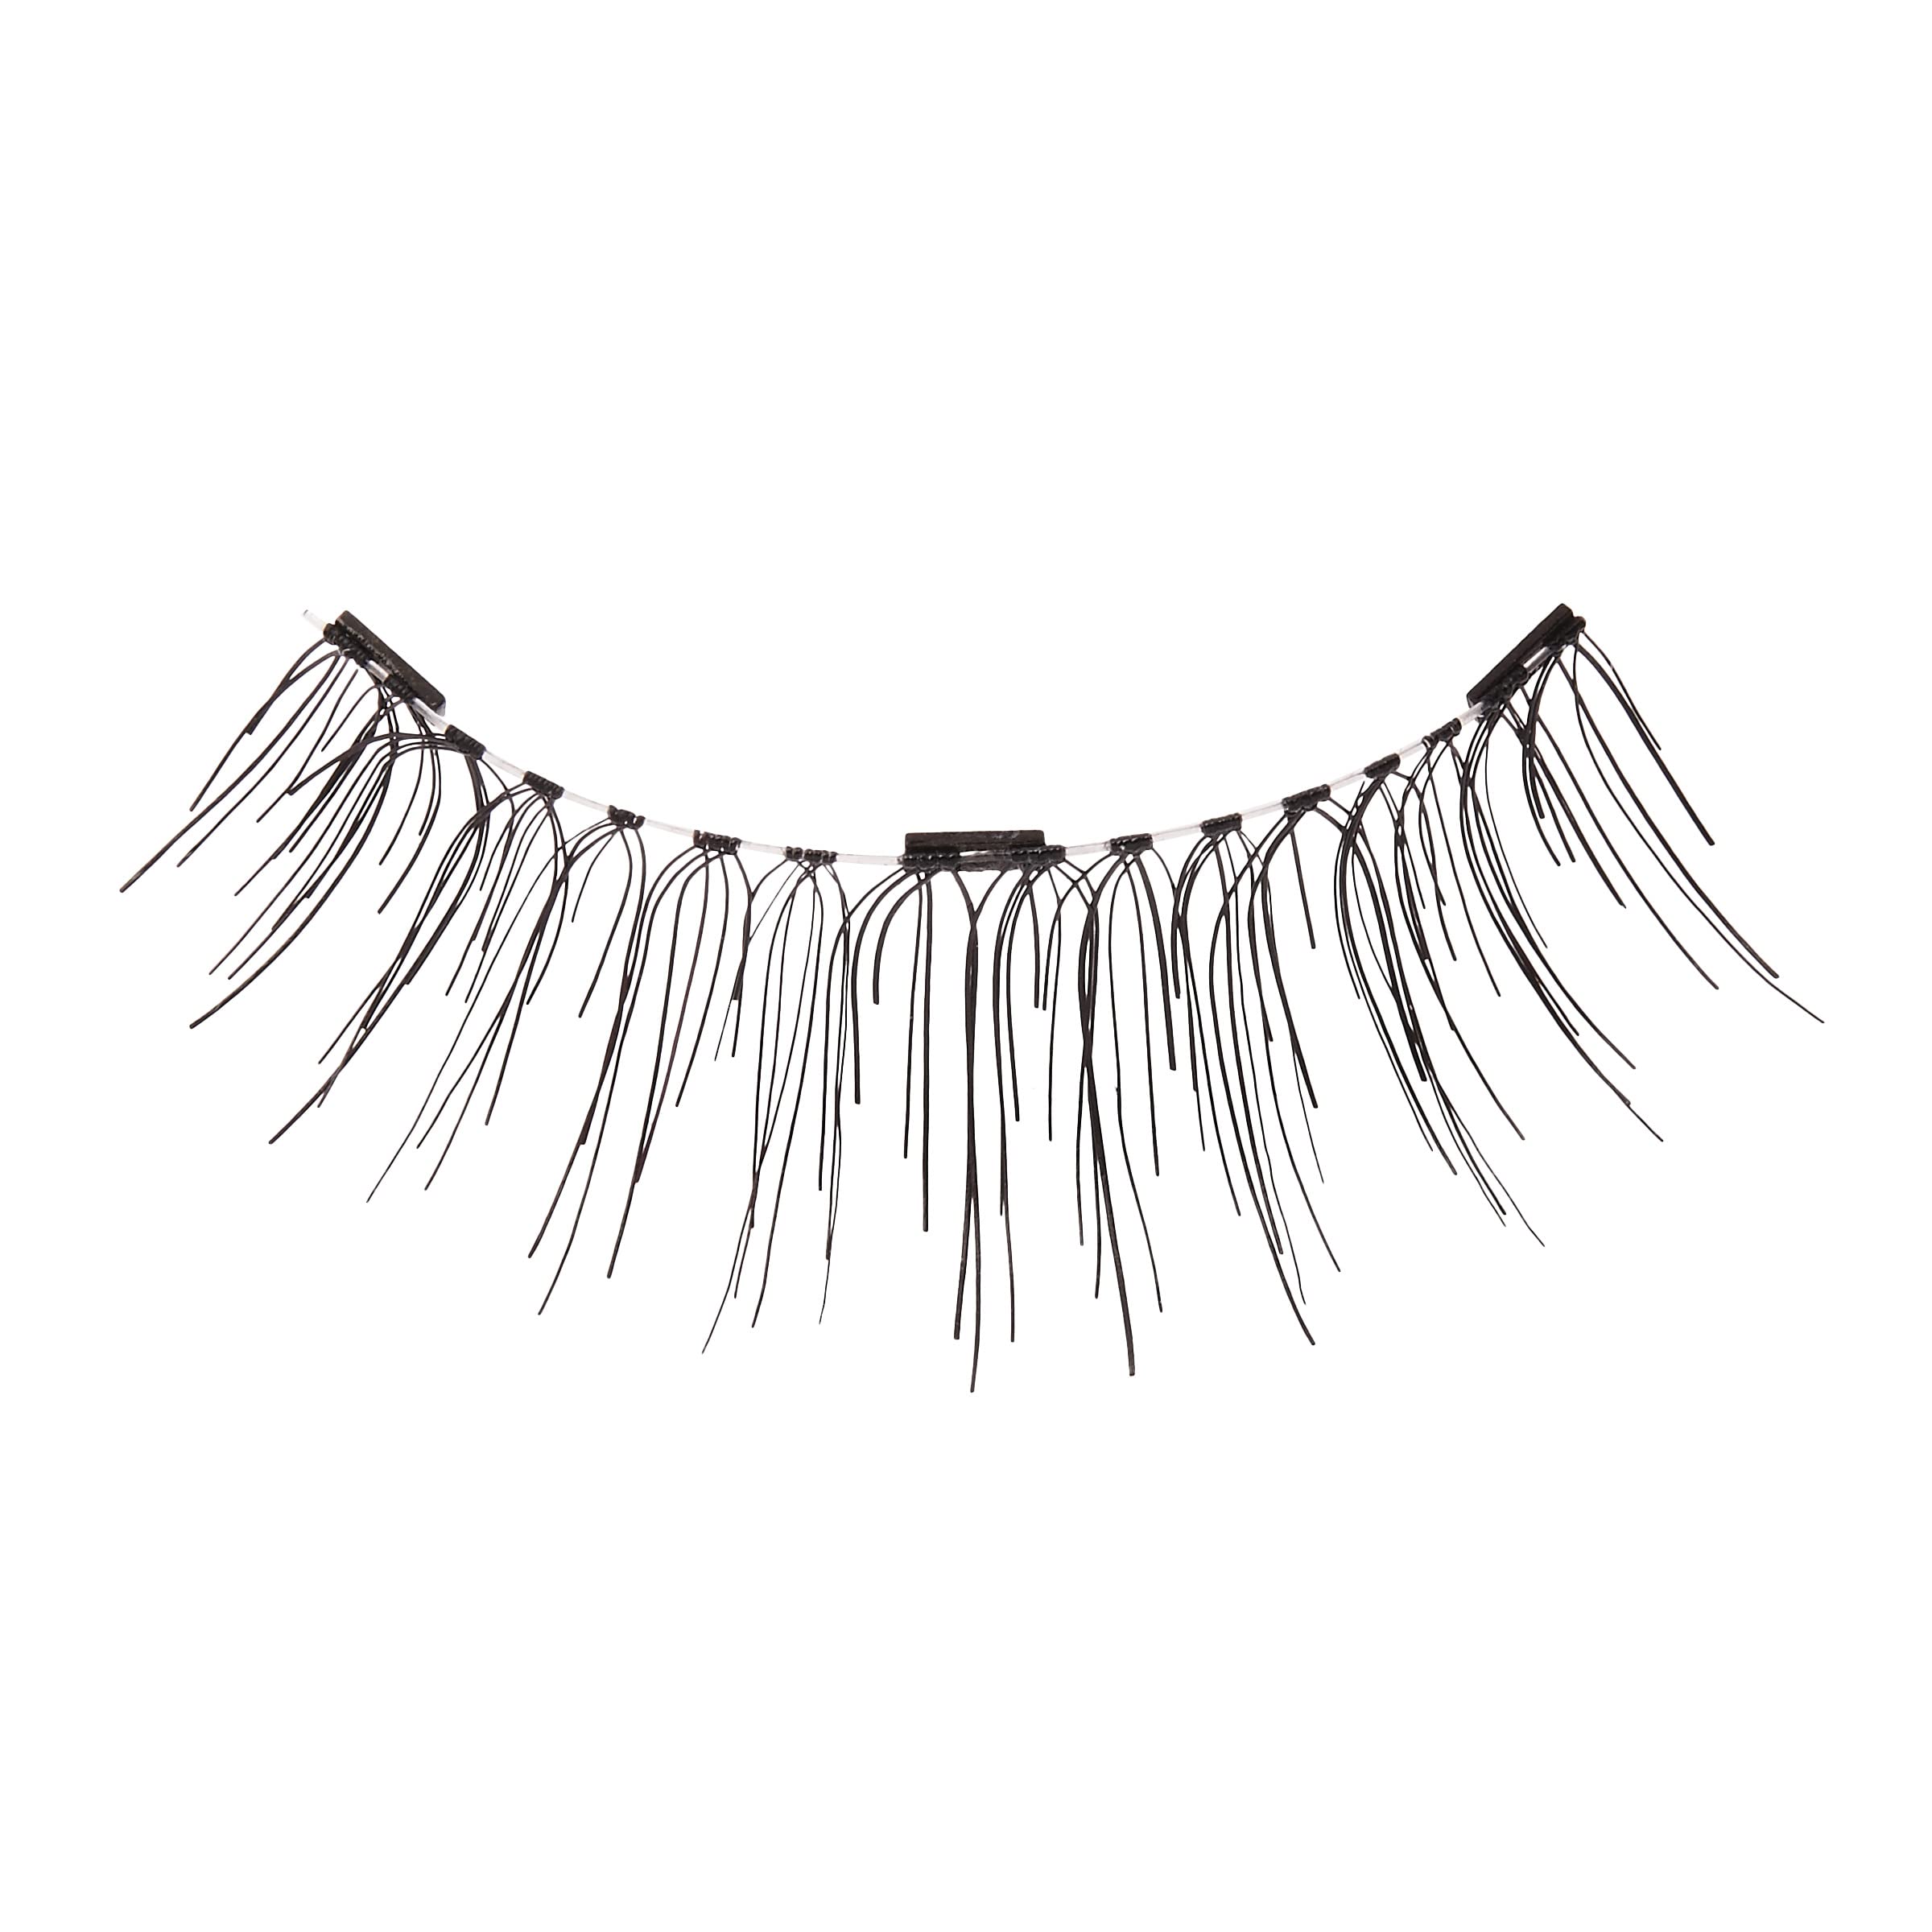 KISS Magnetic Lash 01, Synthetic False Eyelashes with Magnets Under and Over Your Upper Lashes, No Glue Needed, Lightweight, Reusable, Contact Lens Friendly, Cruelty Free, with Lash Applicator, 1 Pair